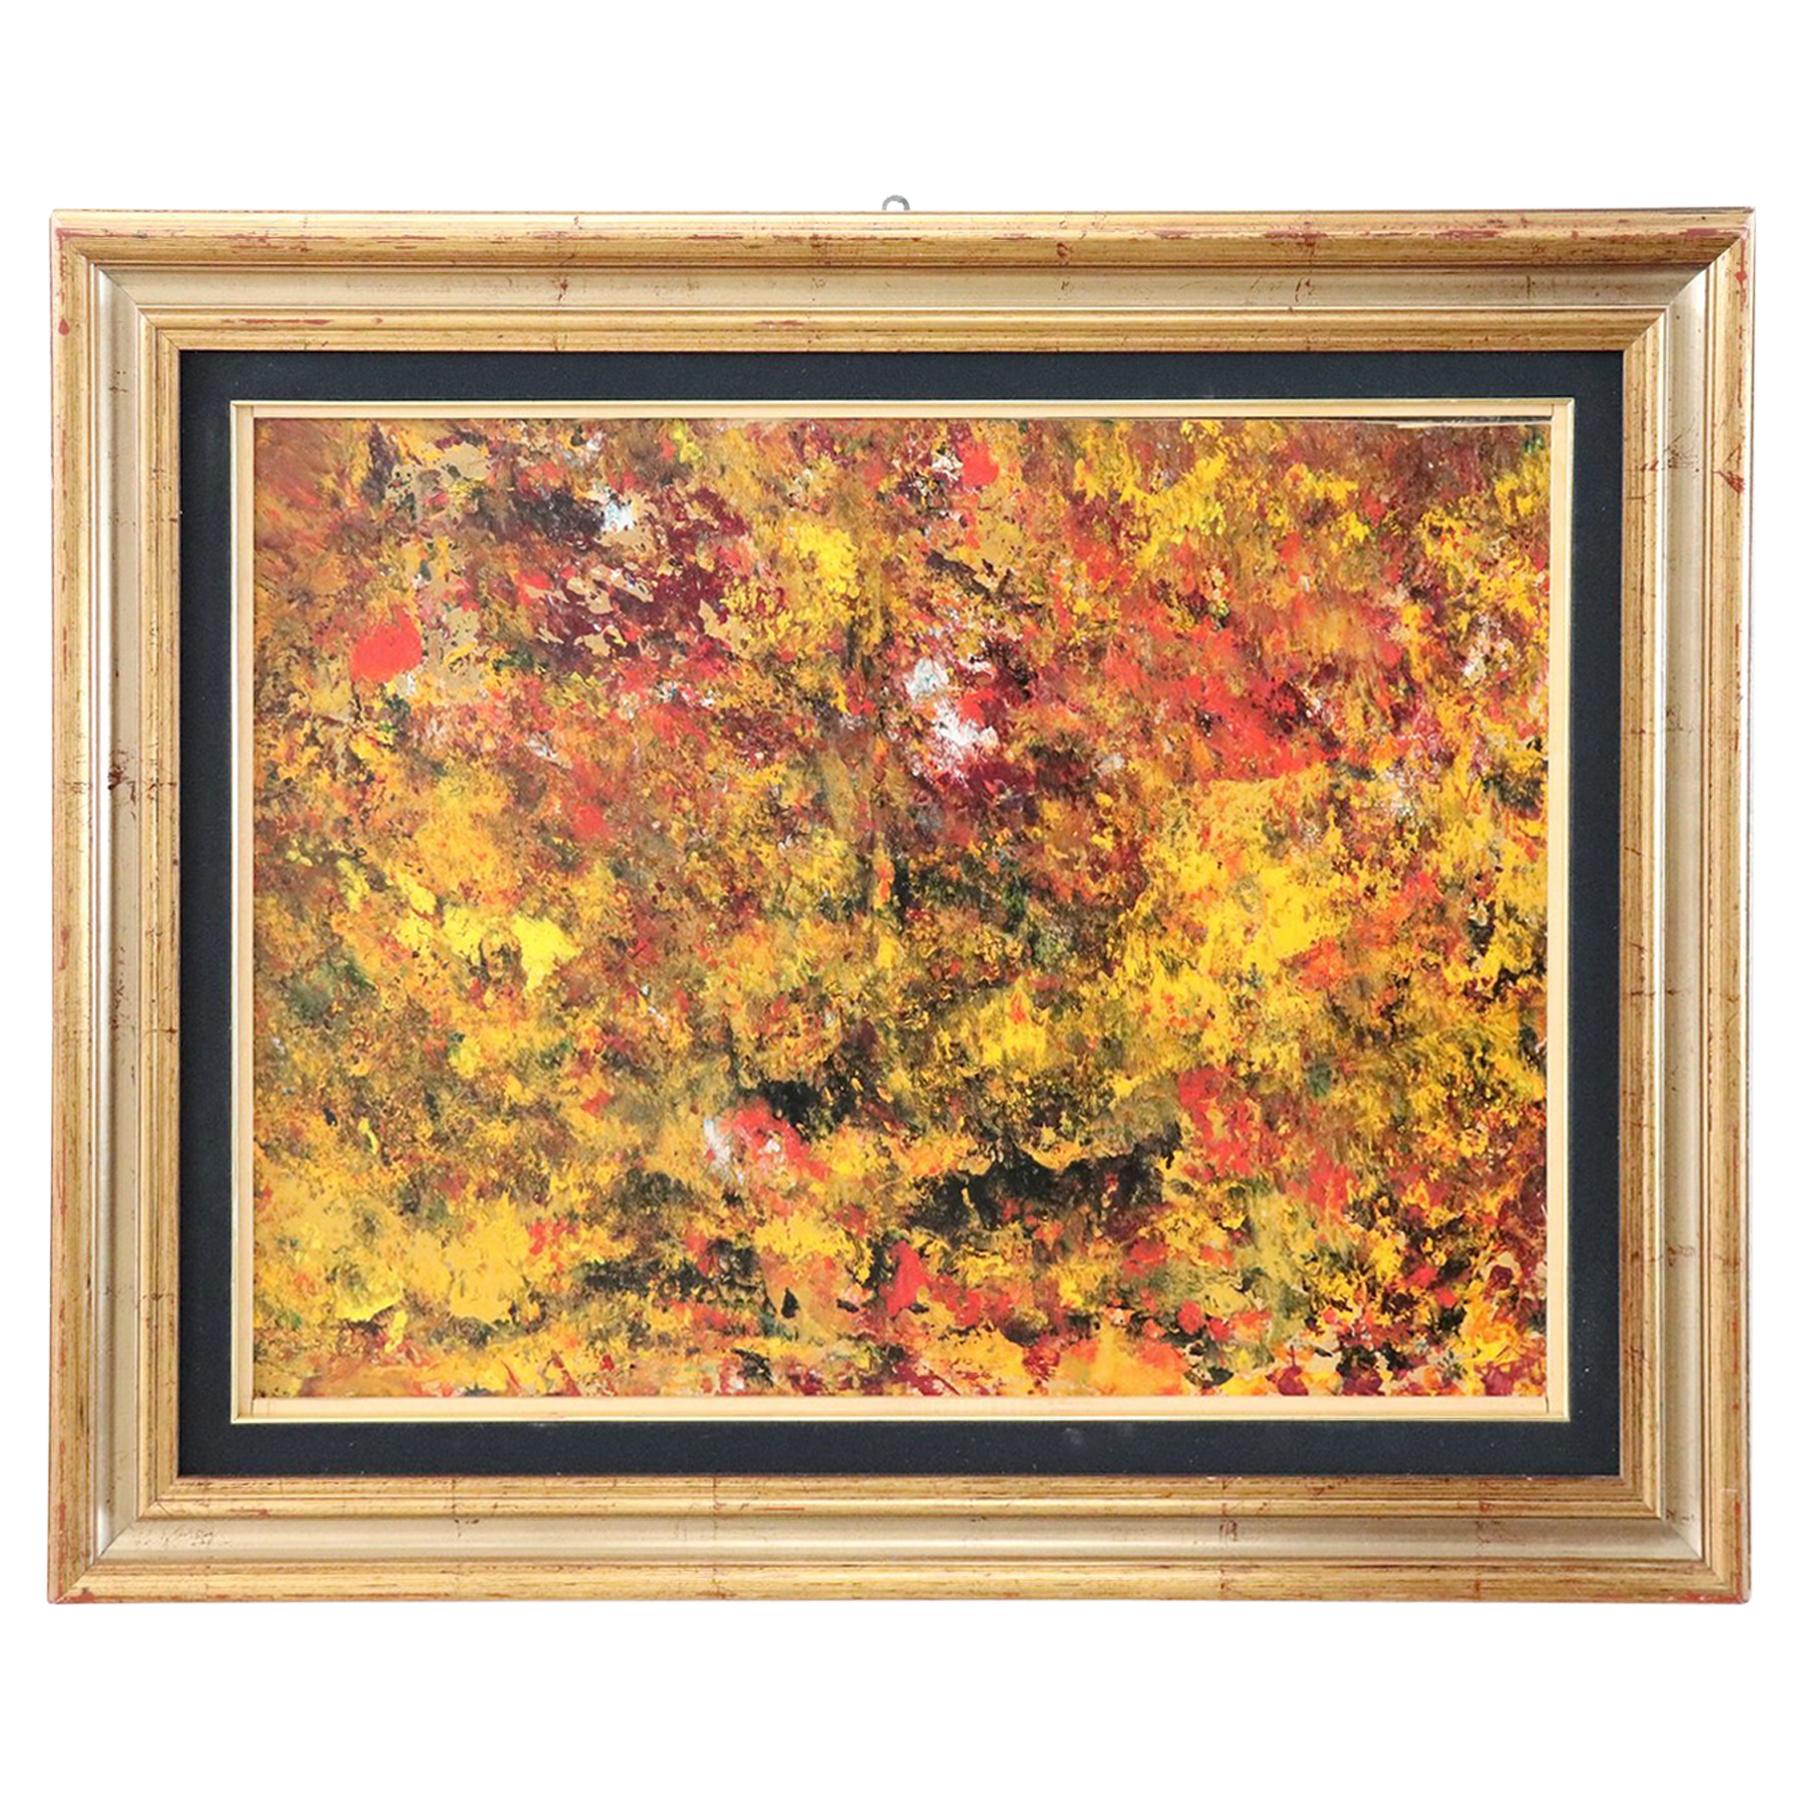 Mixed Technique Painting on Board Title "Autumn", 2012